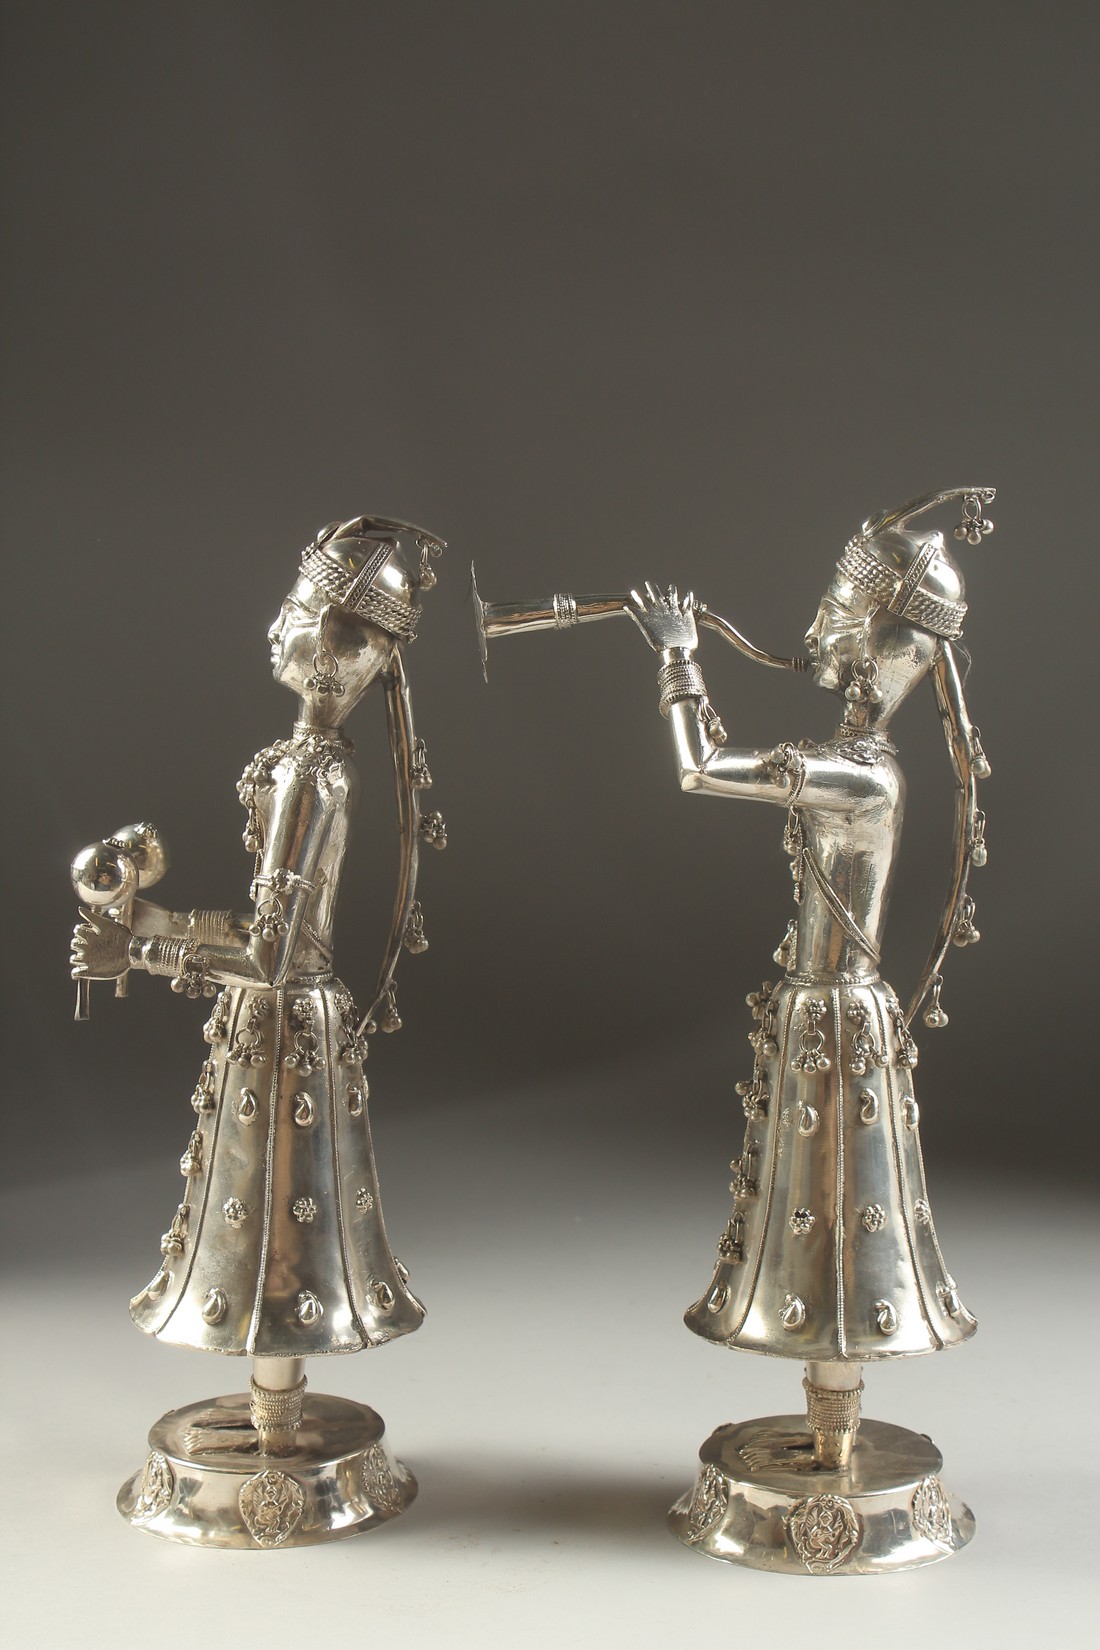 A FINE PAIR OF 19TH CENTURY INDIAN SILVER FIGURES OF MUSICIANS, 30cm high. - Image 10 of 11